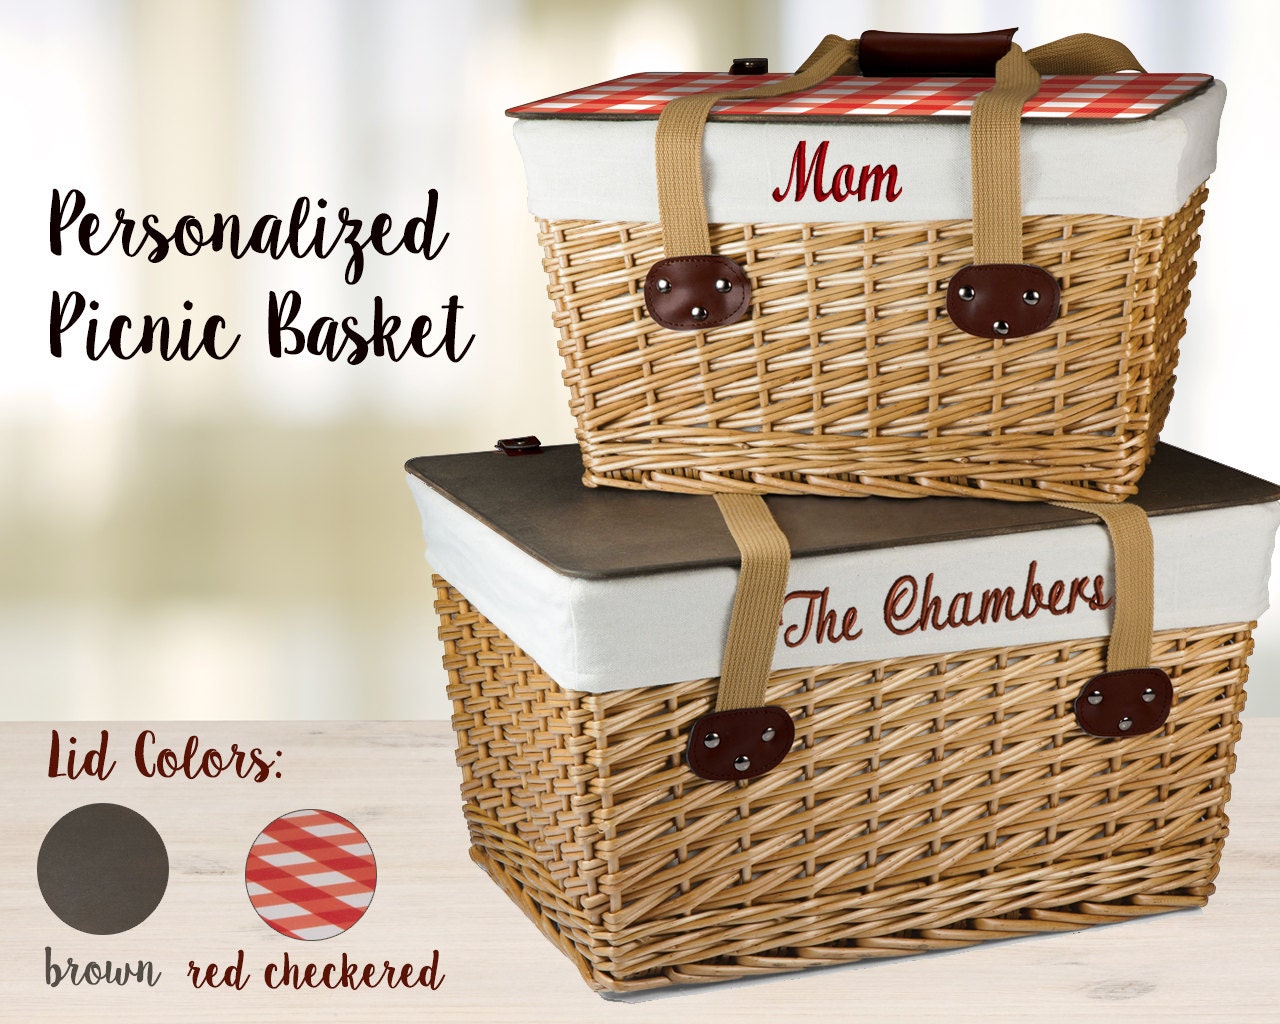 Personalized Wedding Gift Picnic Basket with Embroidered